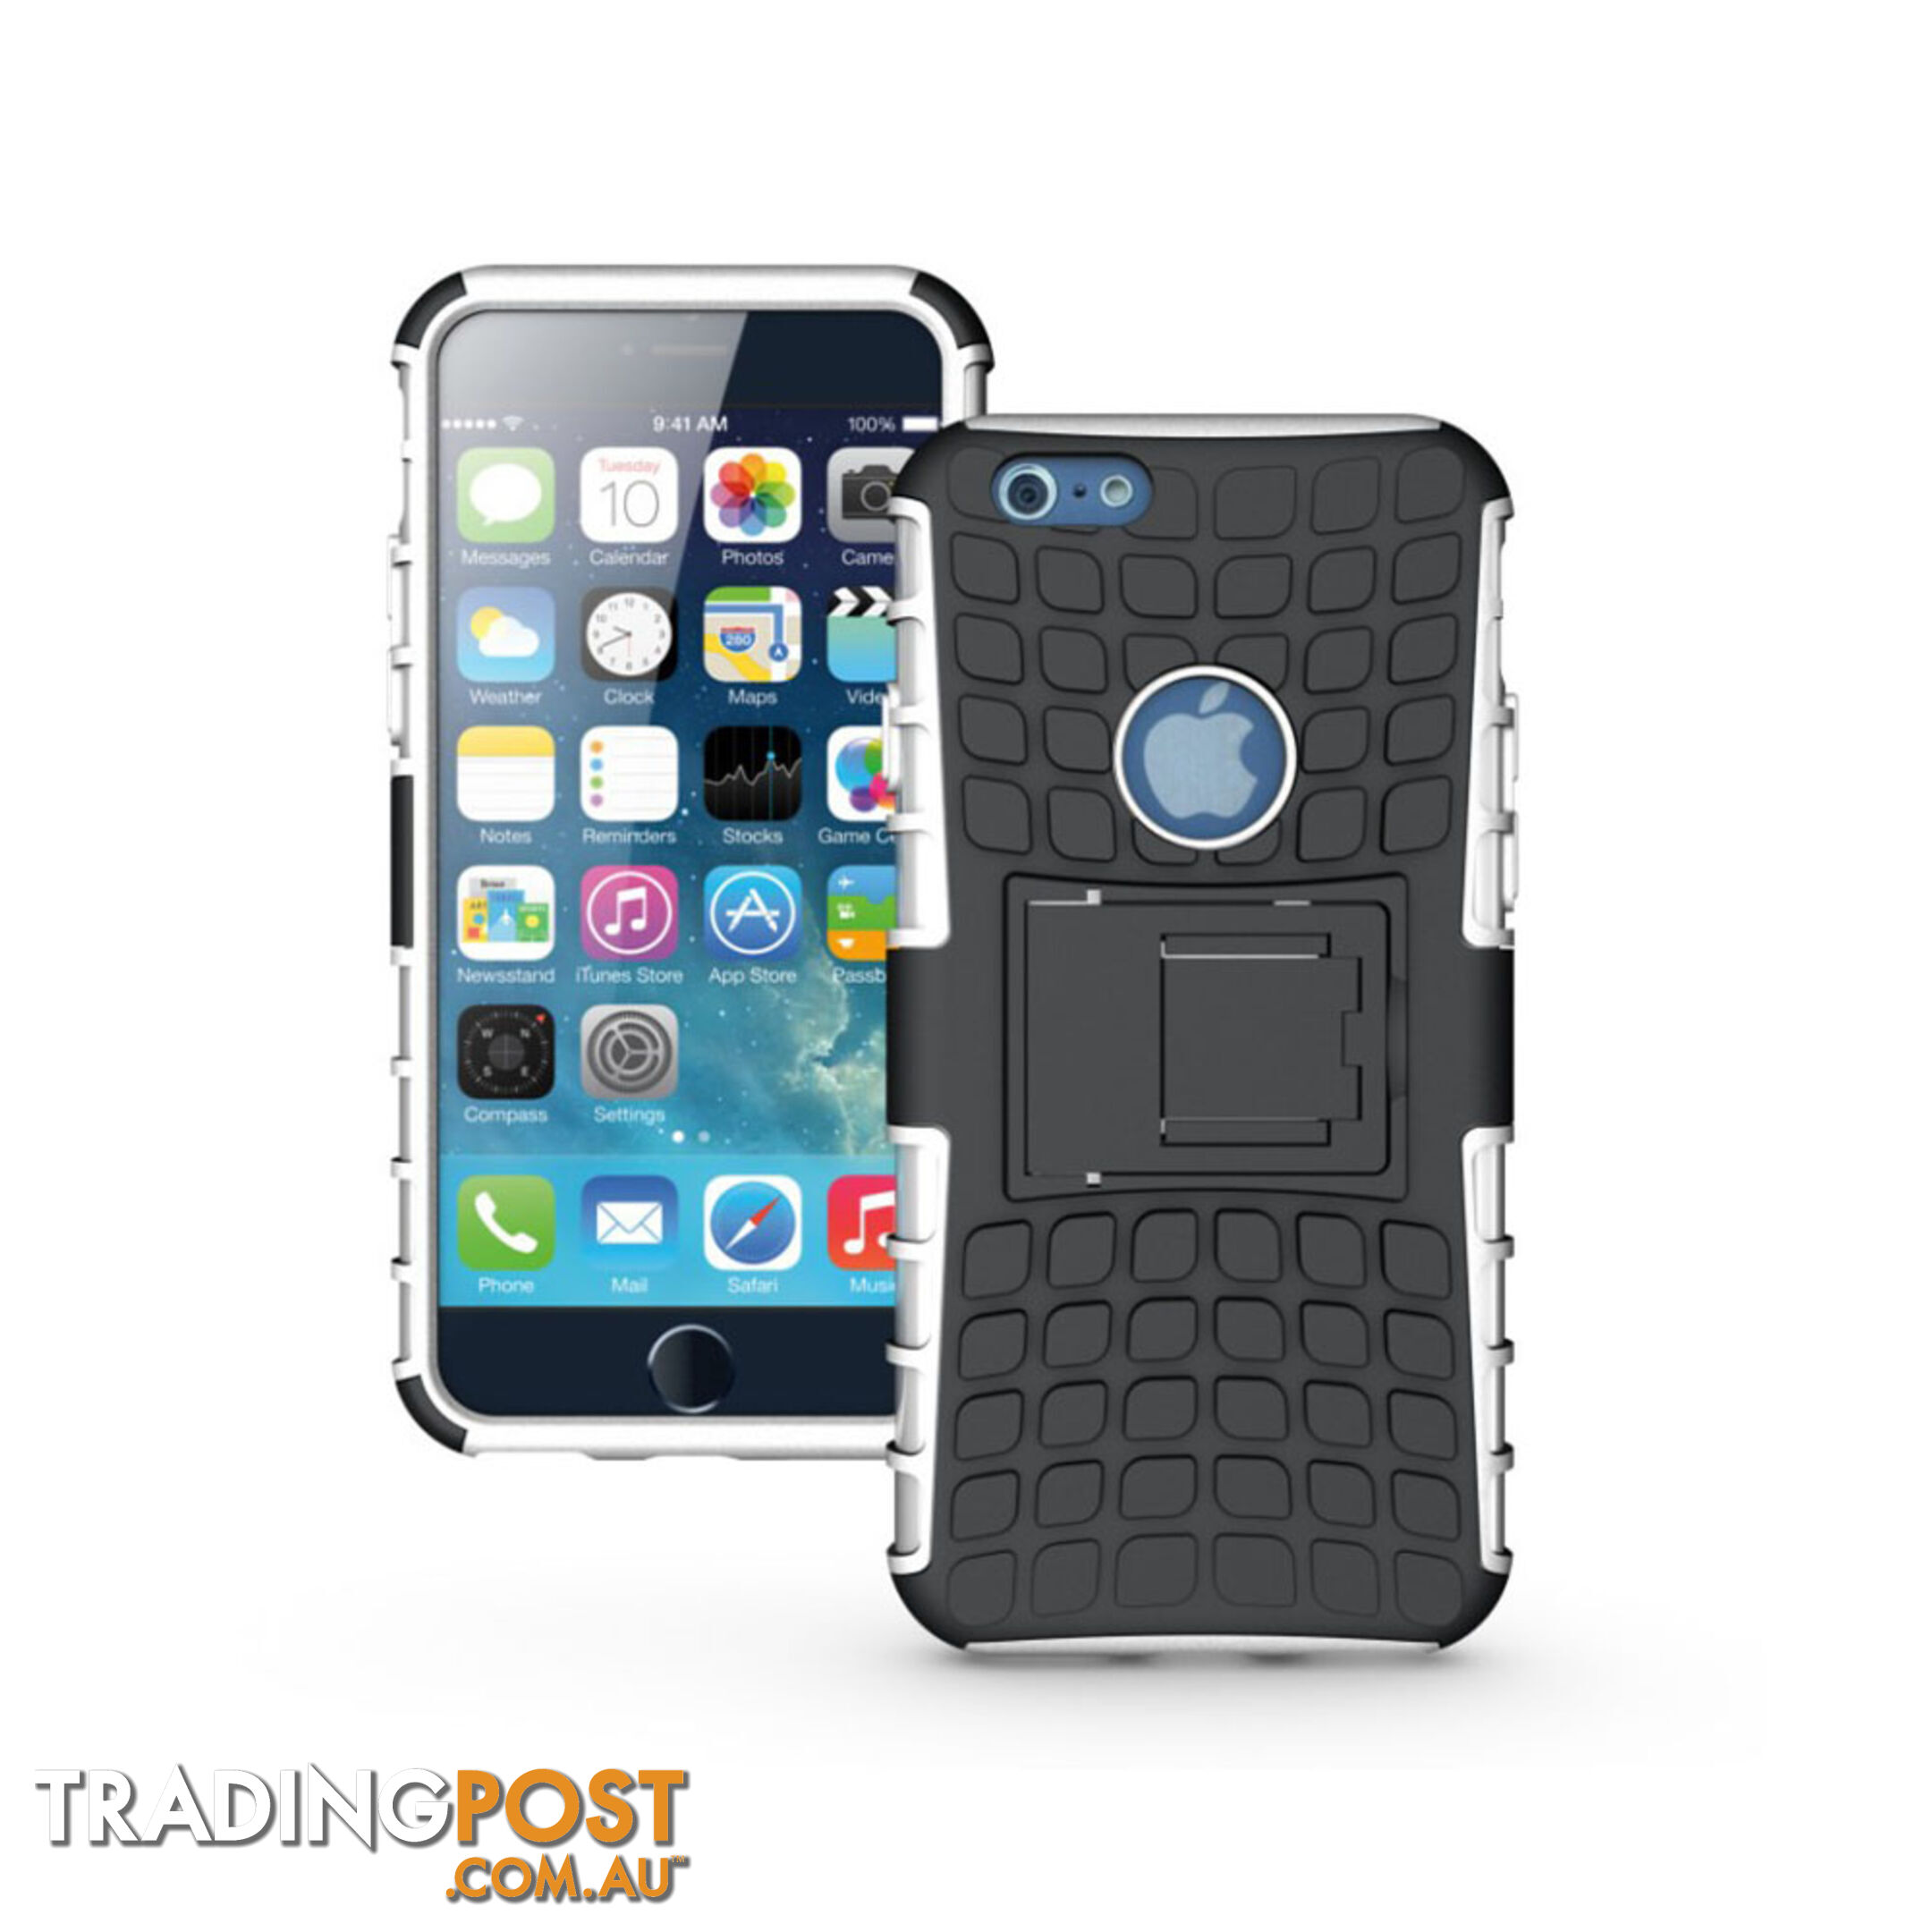 Rugged Heavy Duty Case Cover Accessories White For iPhone 6 Plus 5.5 inch